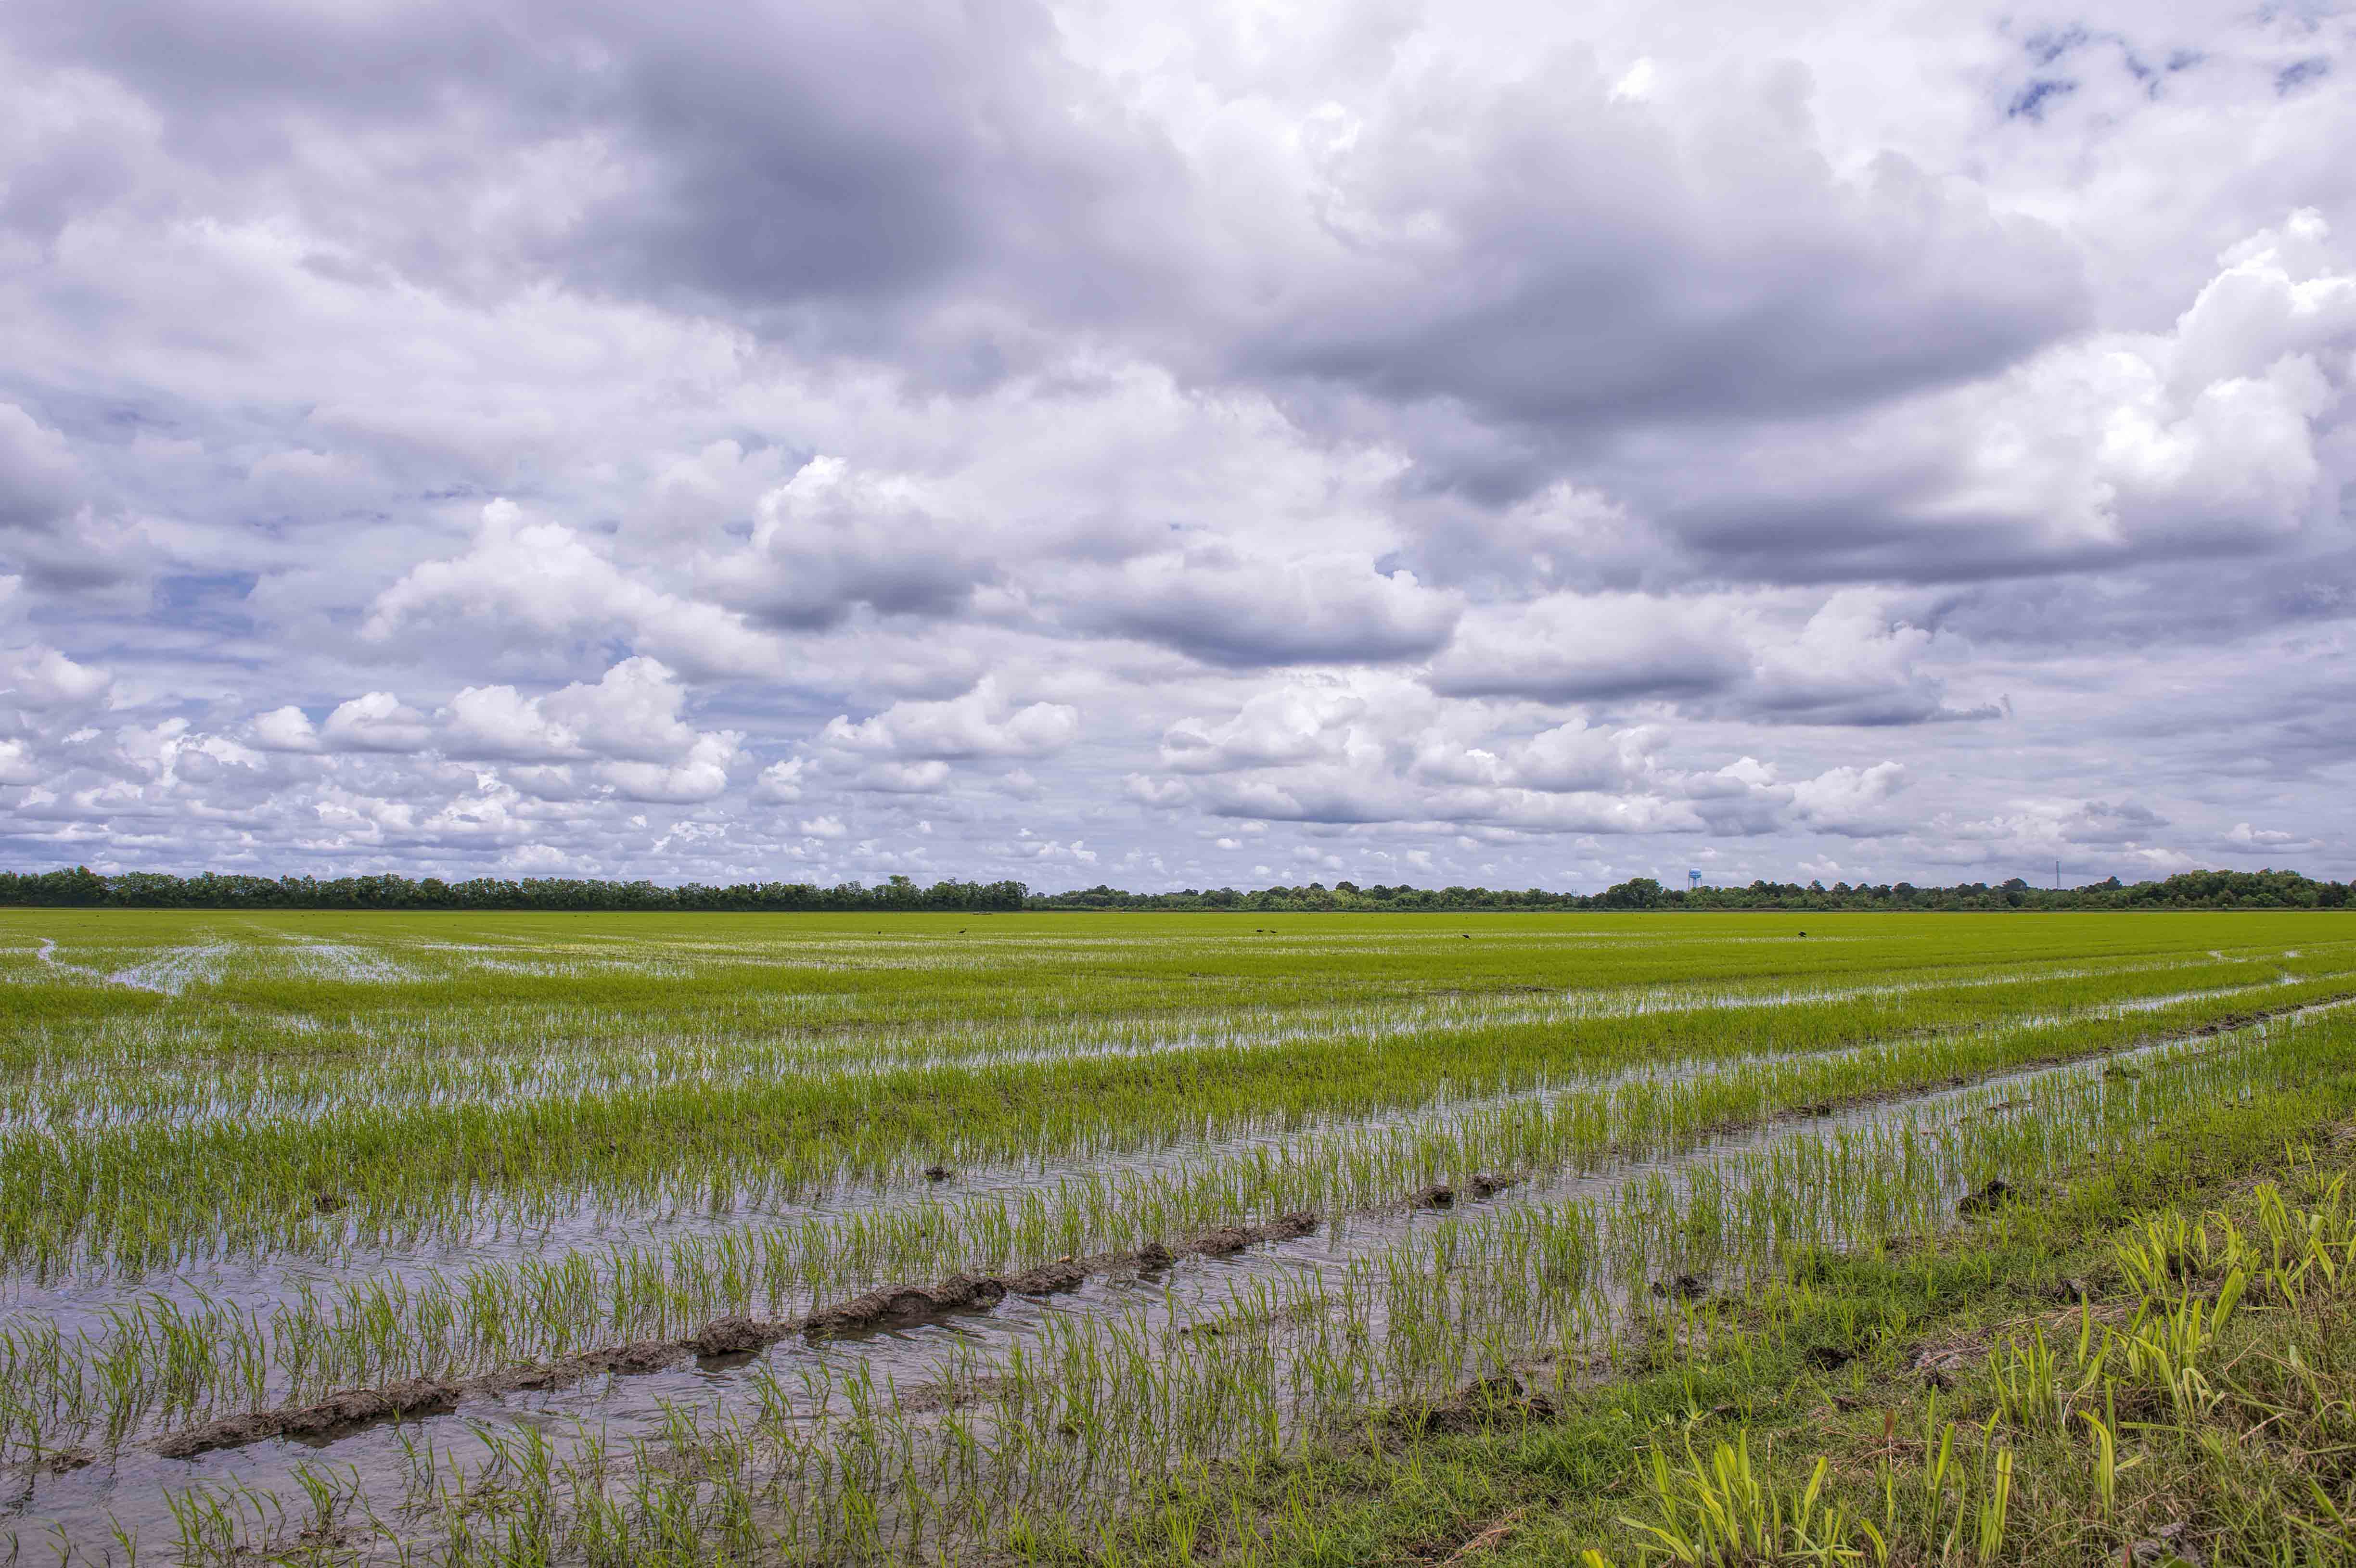 Image of rice field in South Louisiana